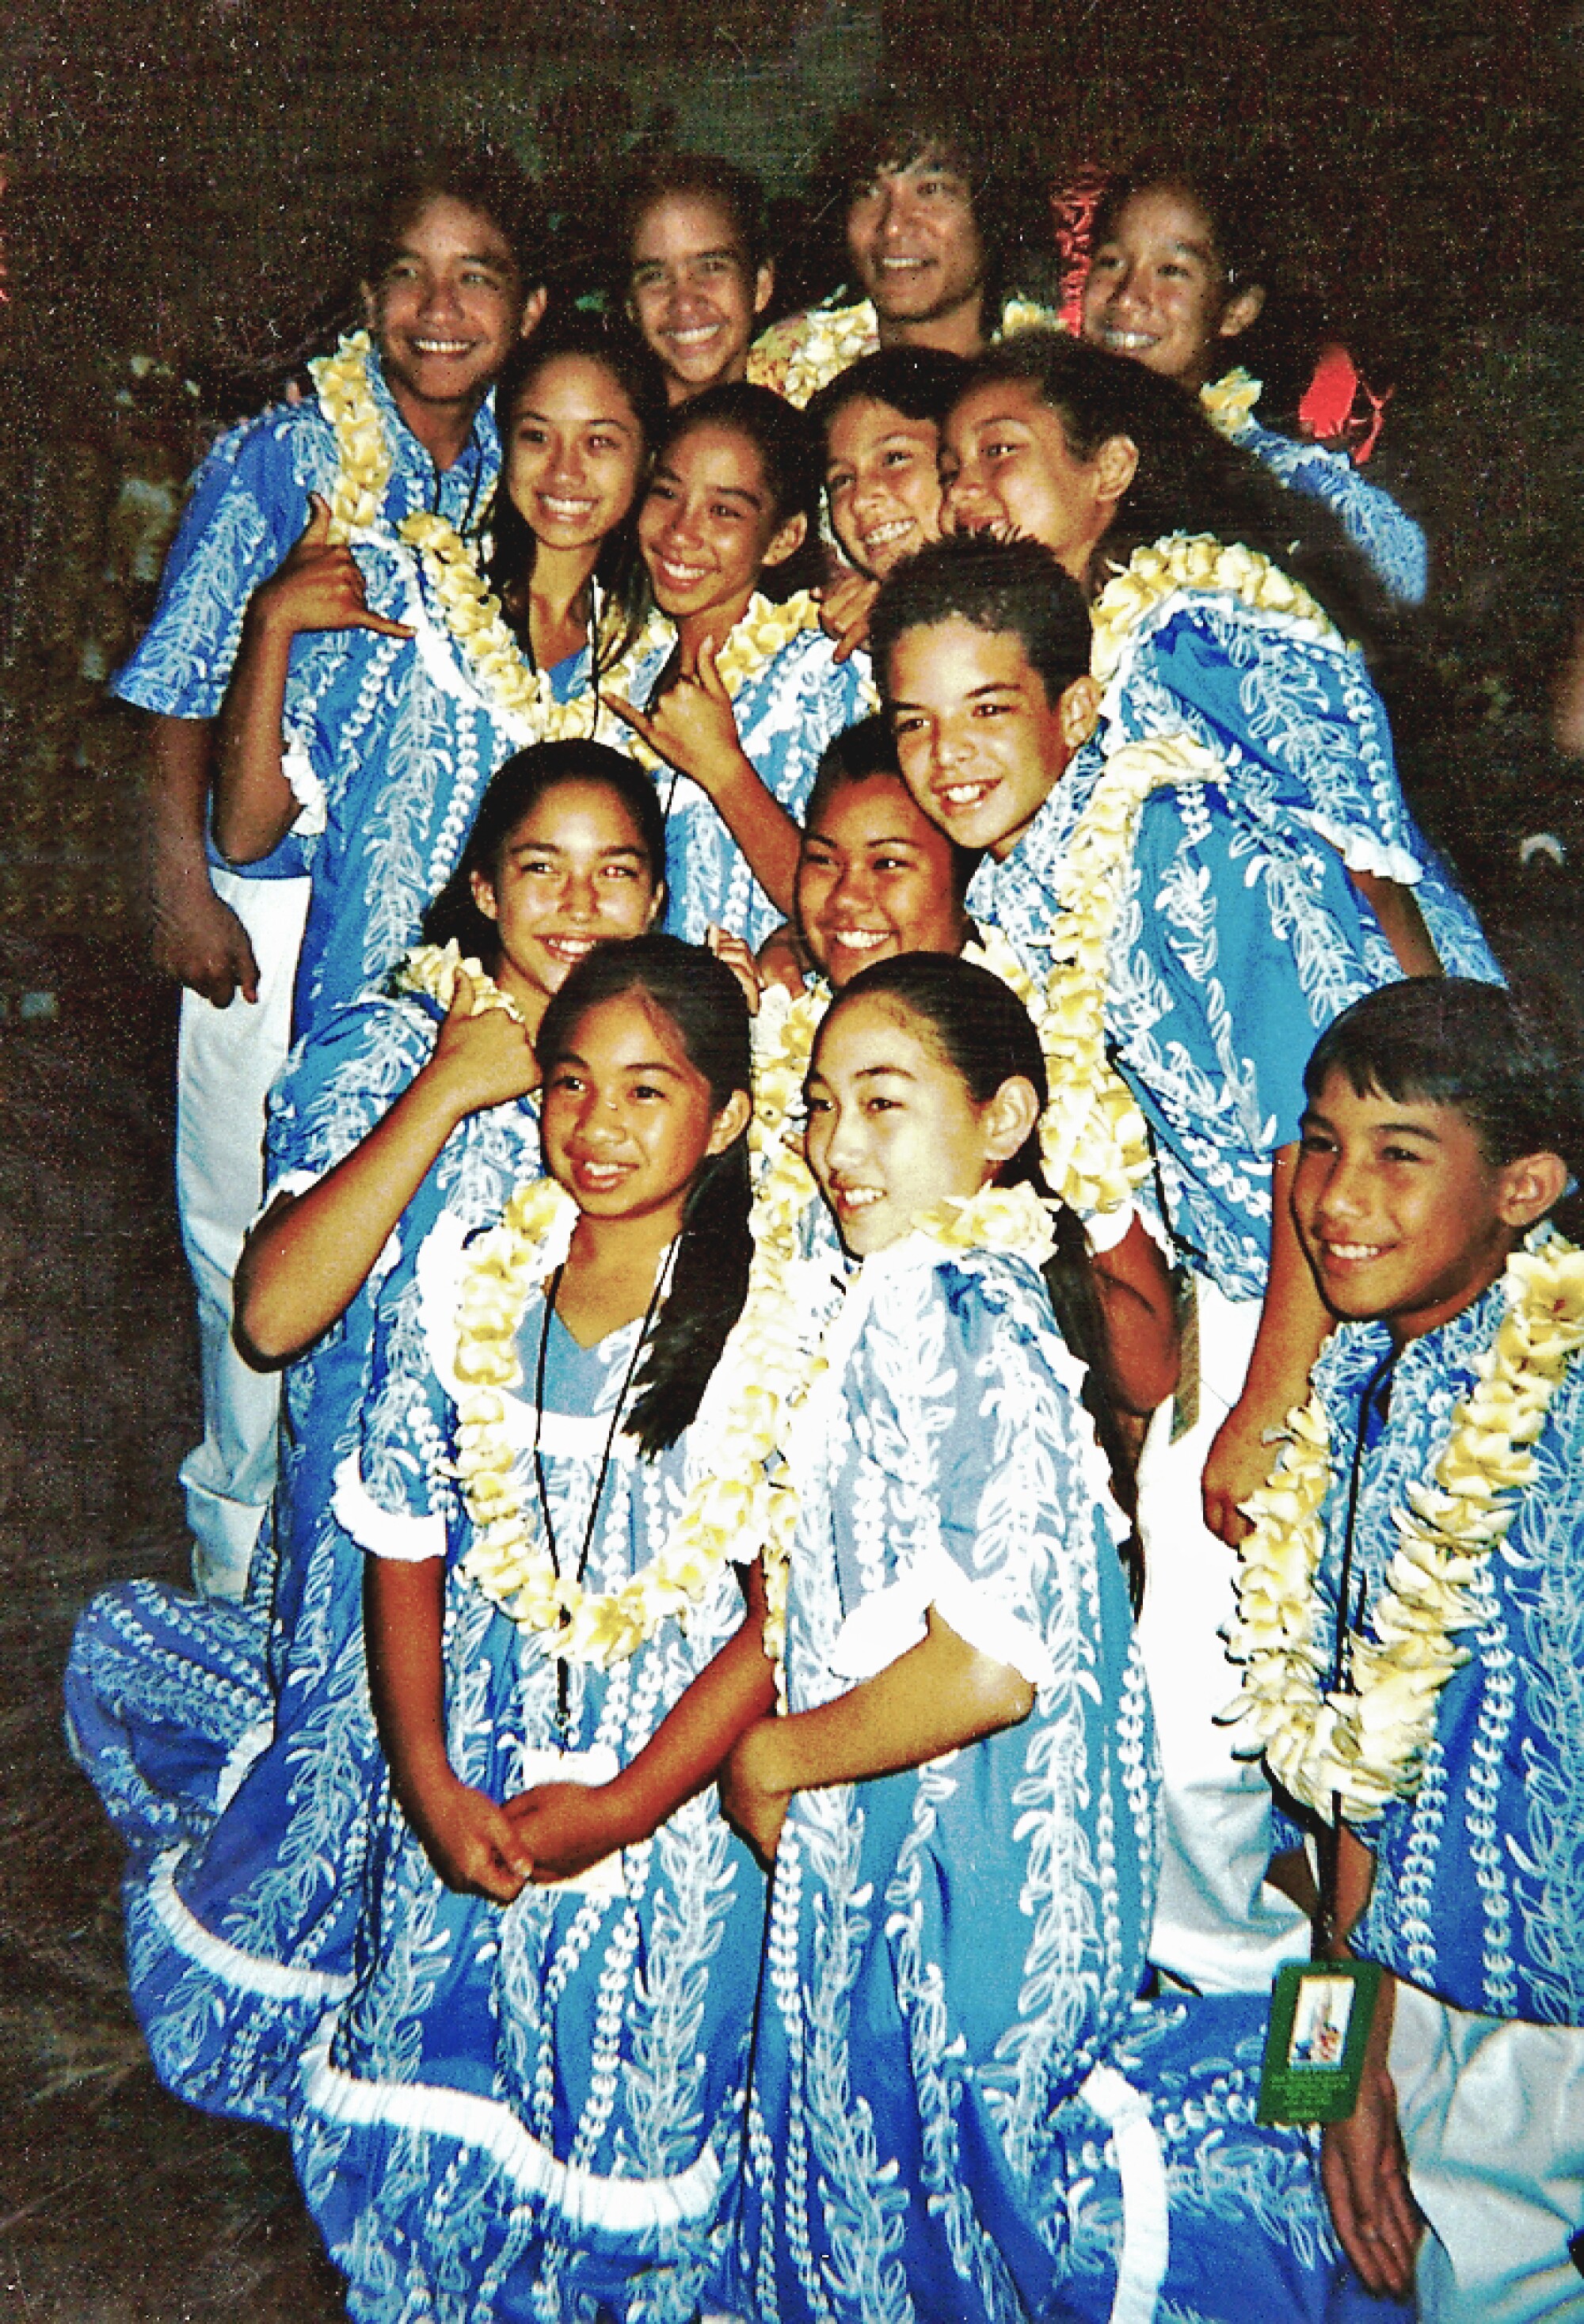 A group of children in matching, ruffled blue outfits and yellow leis posing with a man